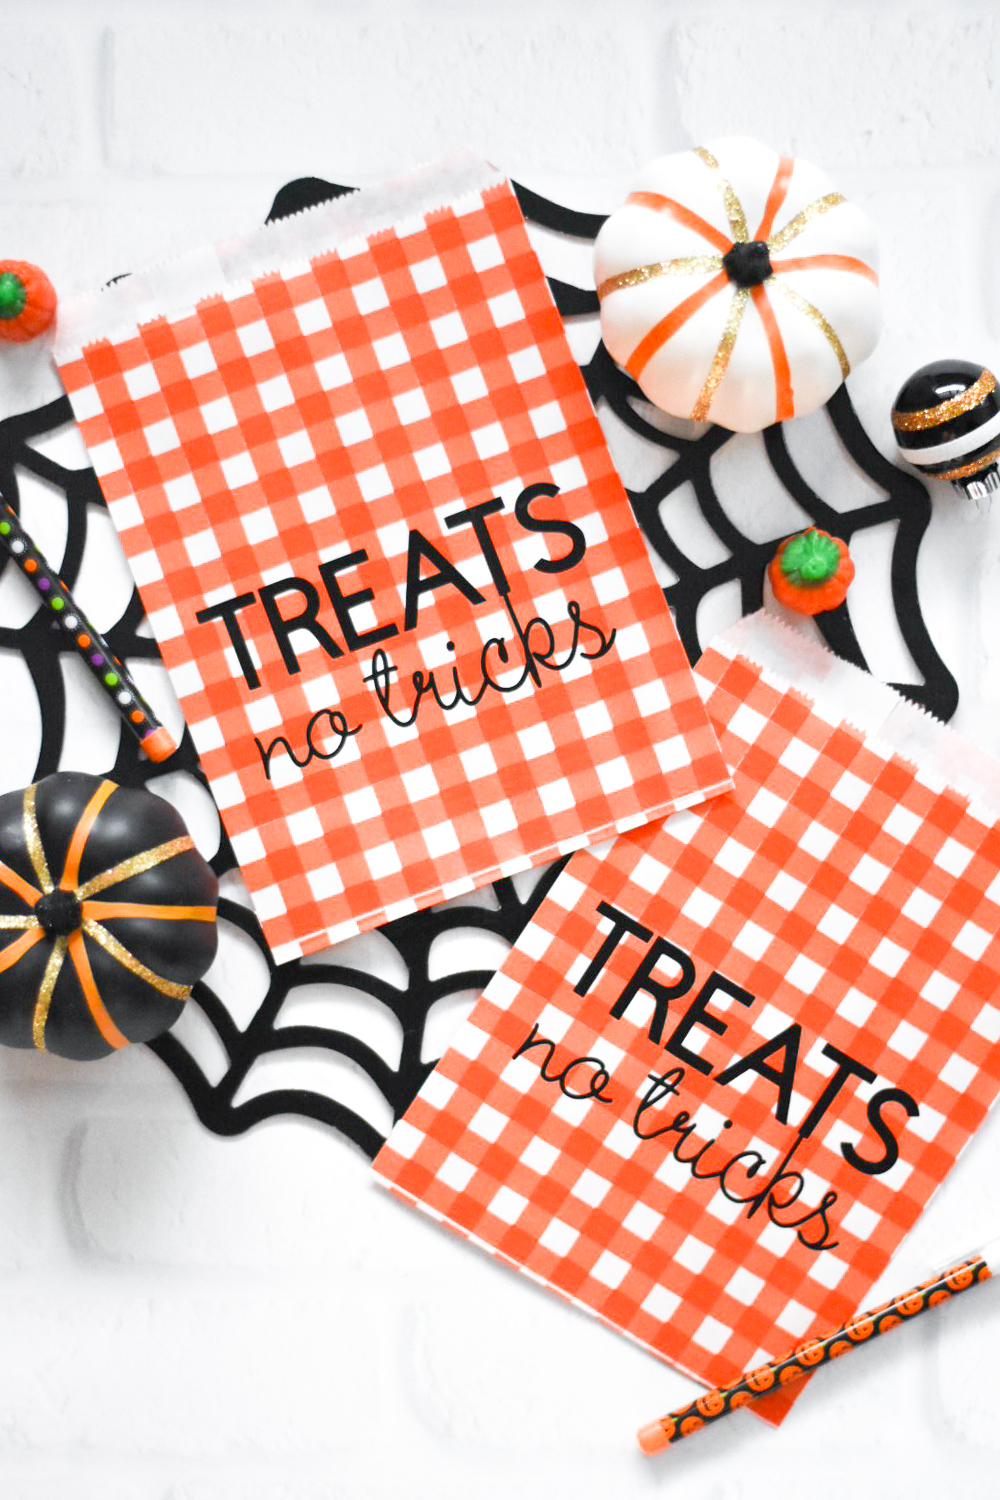 Make your Own Halloween Treat Bags with Iron-On Vinyl – Treats No Tricks